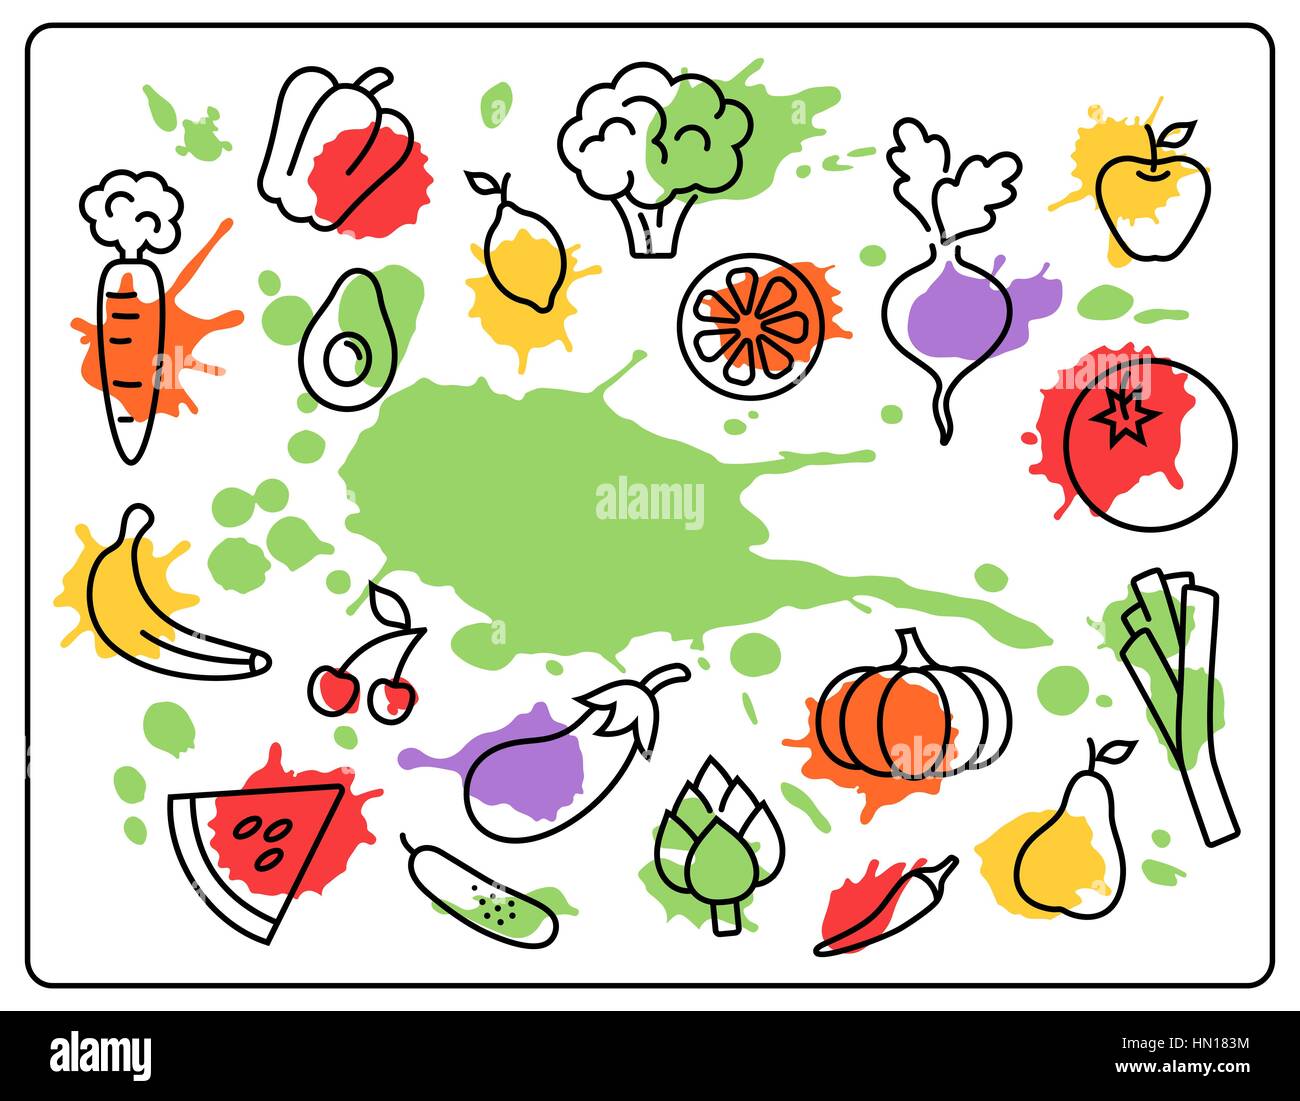 Healthy Food Vegetables and Fruits Bright Blots Icons Isolated o Stock Vector